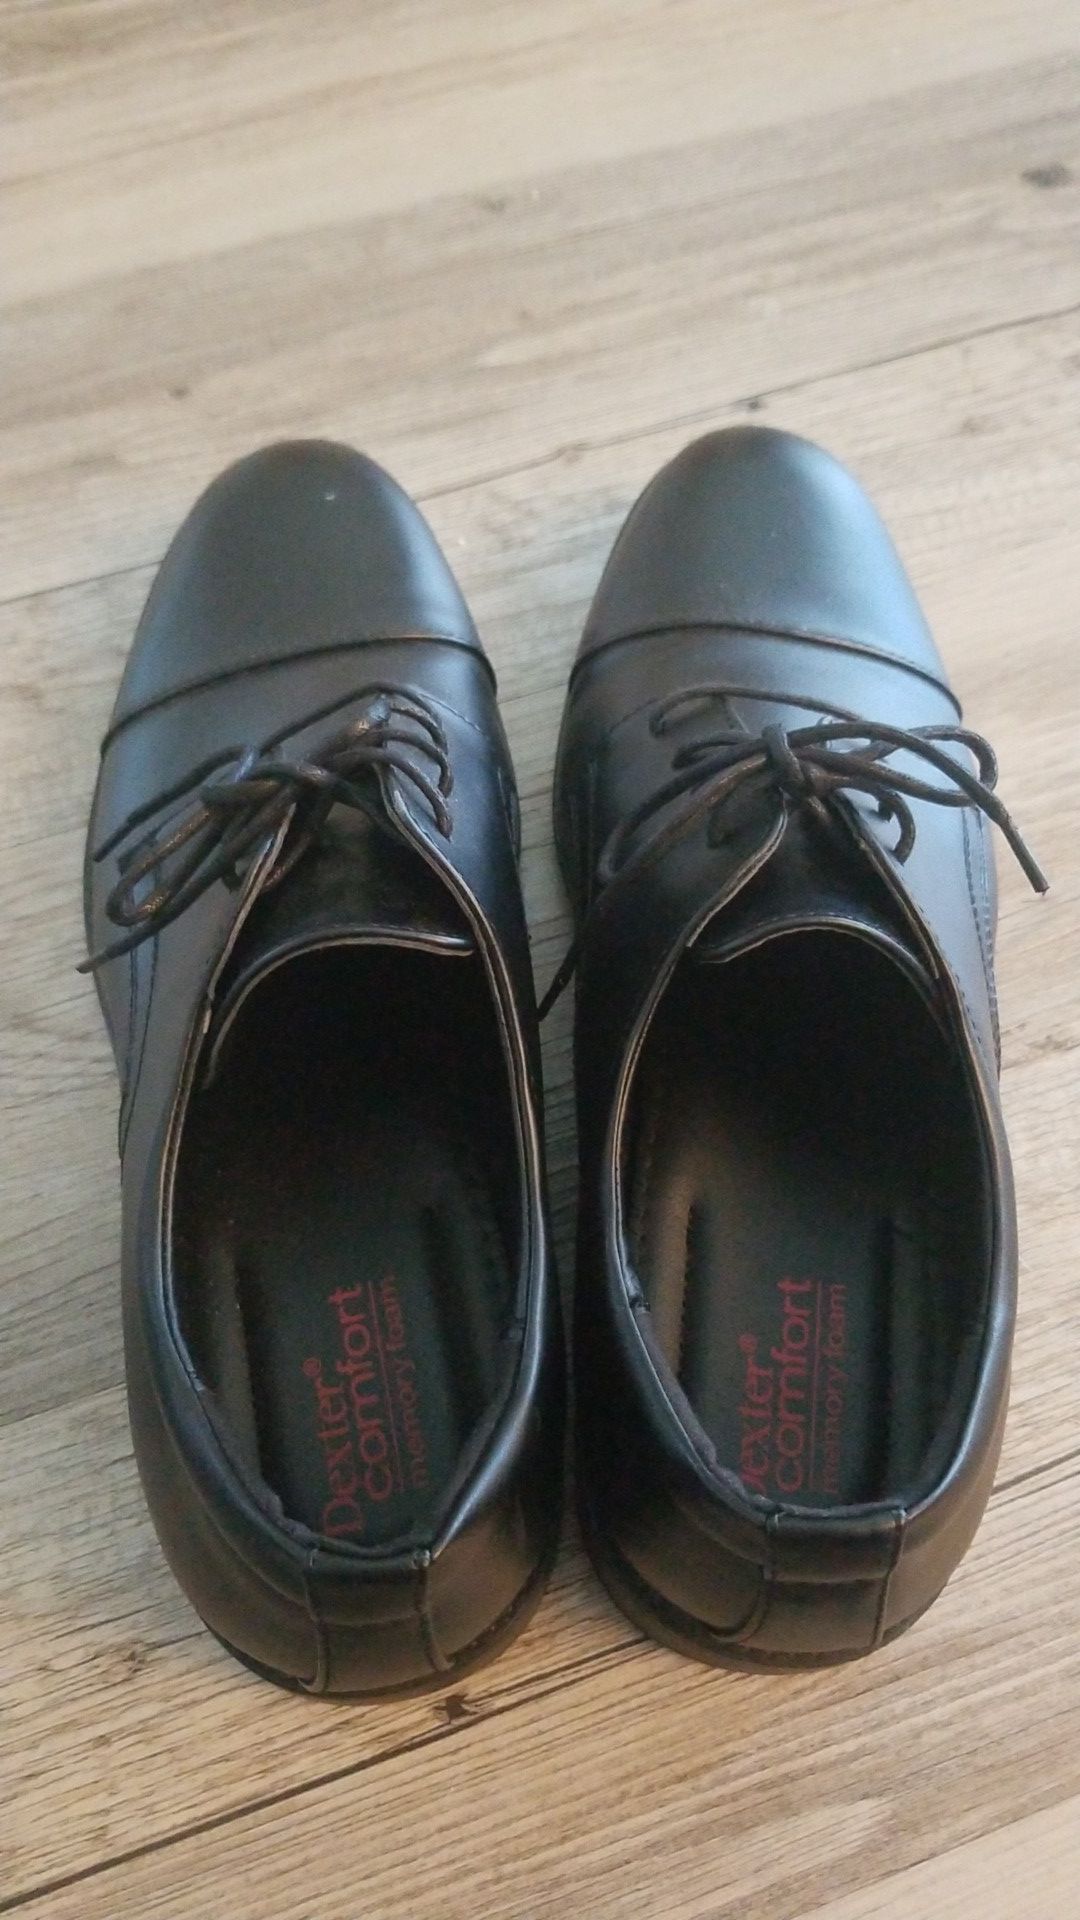 New mens leather shoes never used